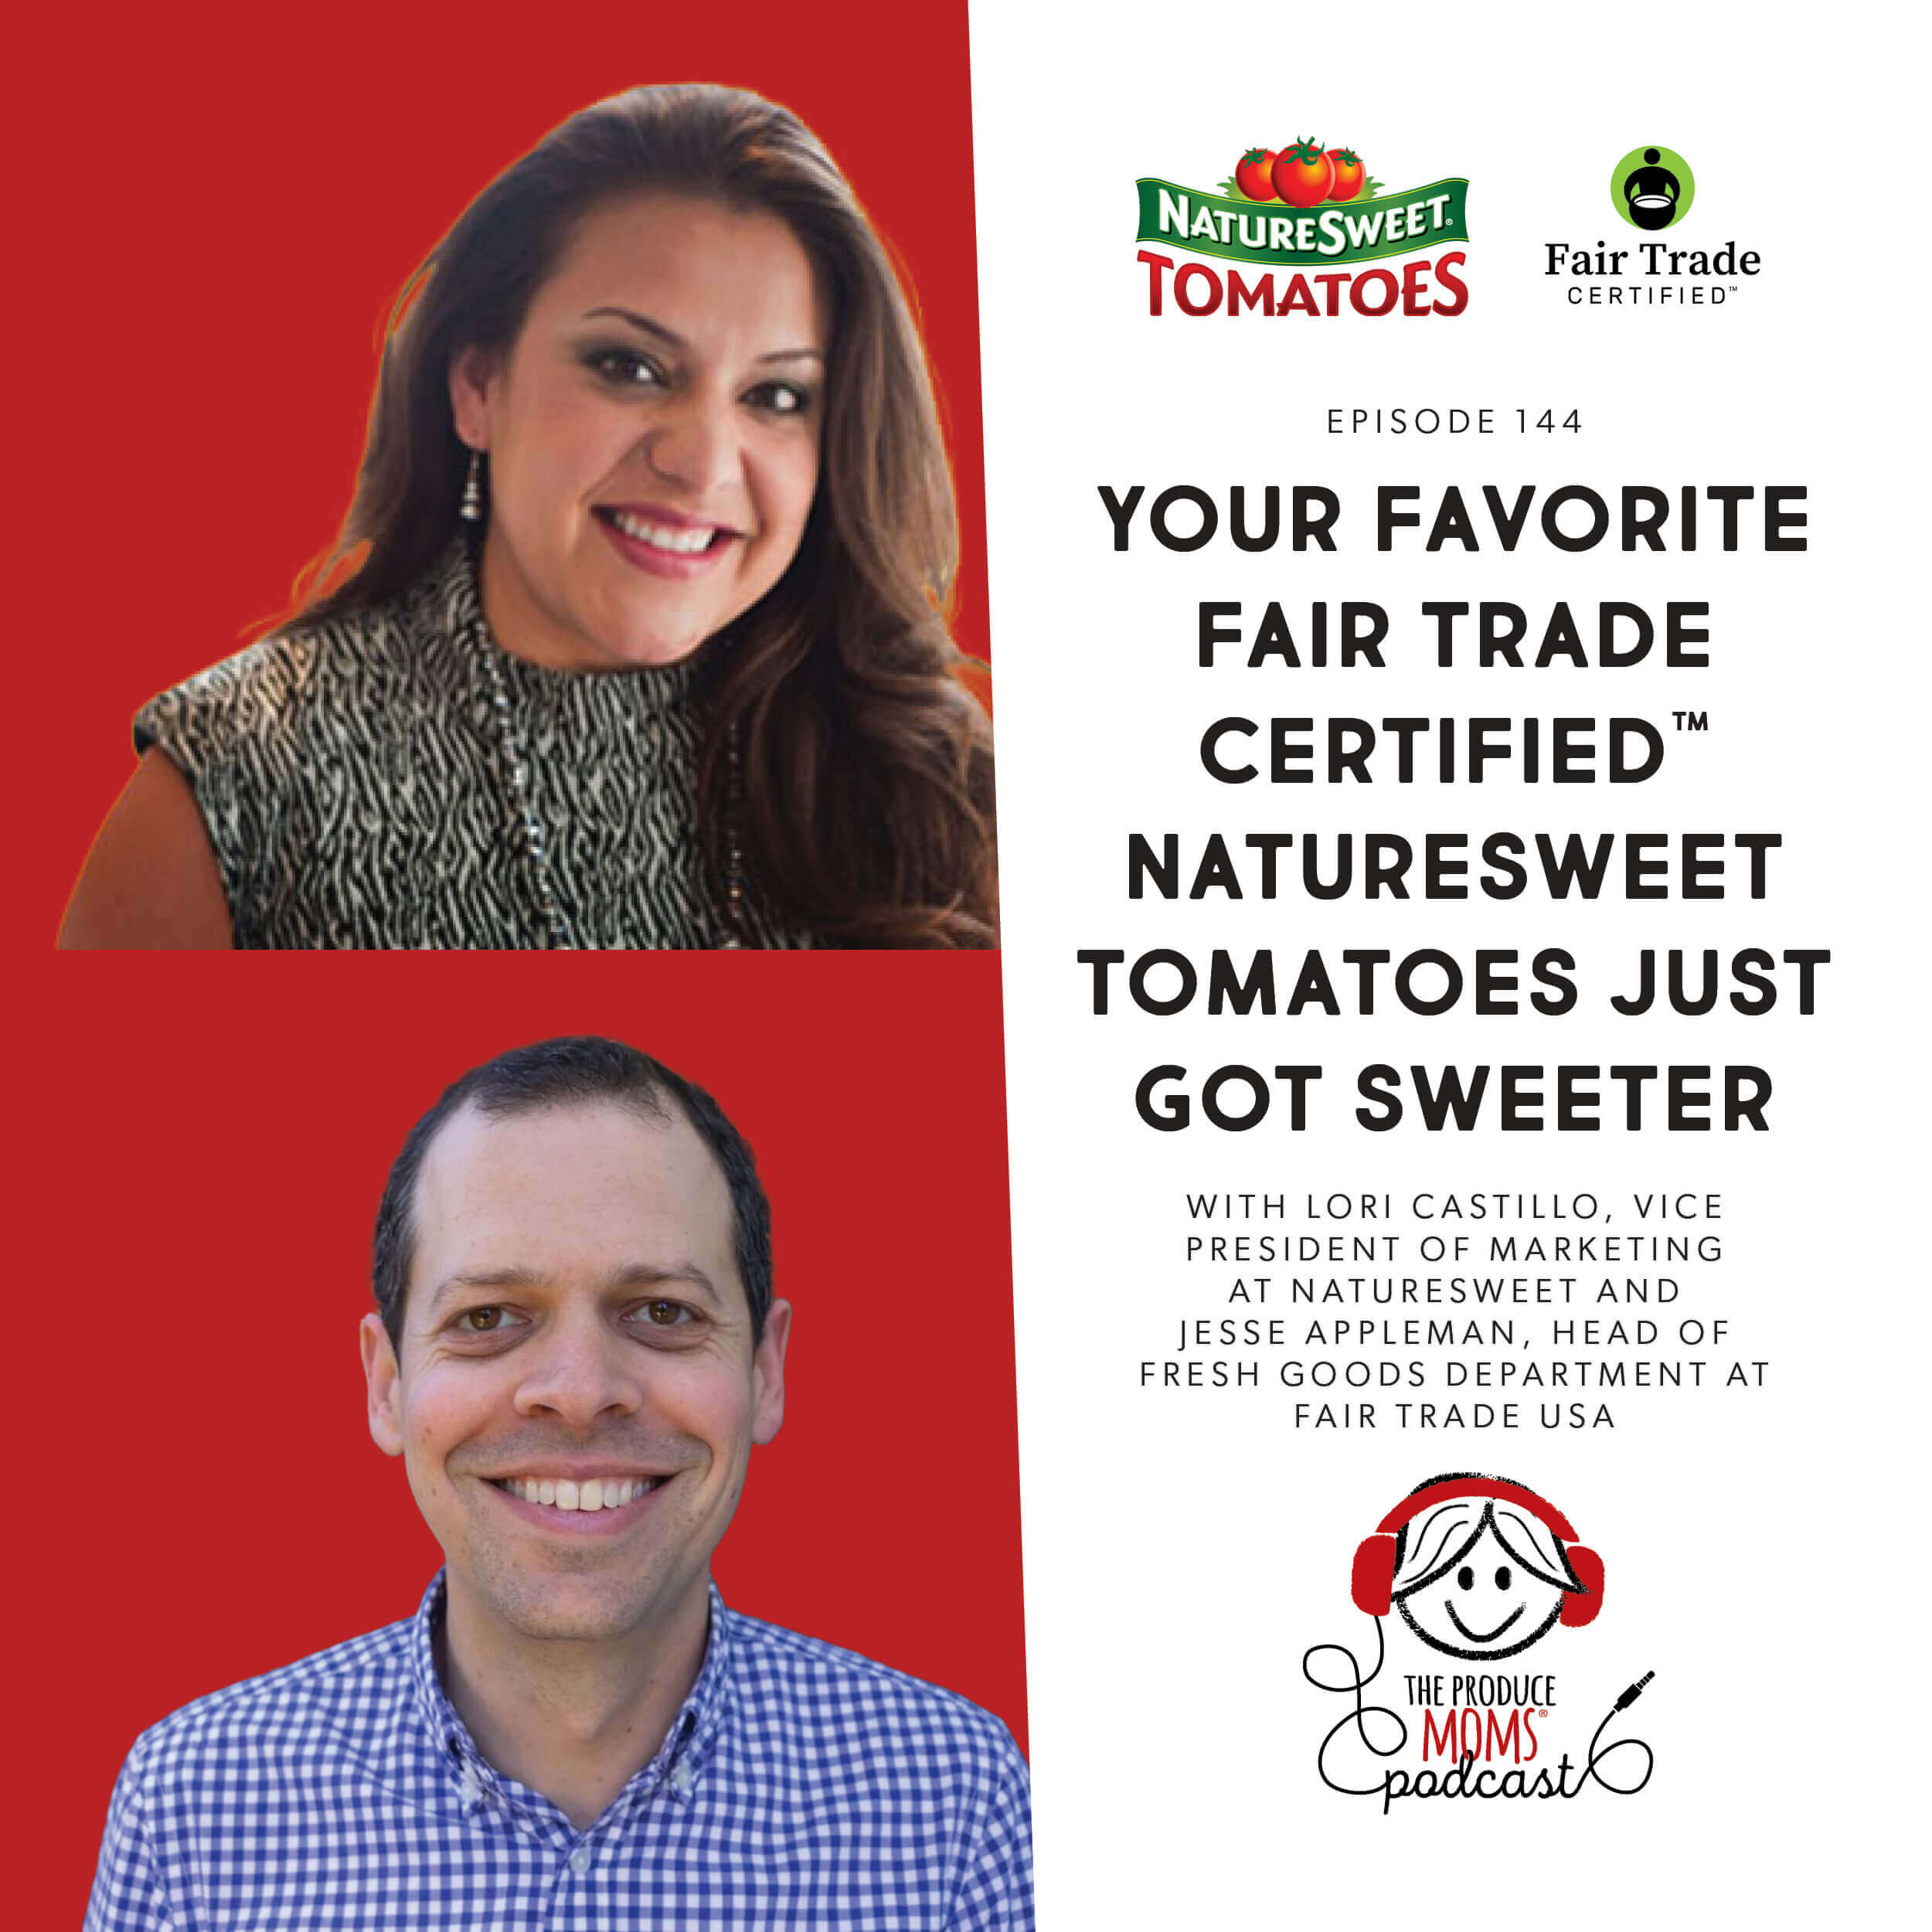 Episode 144: Your Favorite Fair Trade Certified™ NatureSweet Tomatoes Just Got Sweeter With Lori Castillo, Vice President Of Marketing At NatureSweet And Jesse Appleman, Director Of Fresh Goods Department At Fair Trade USA